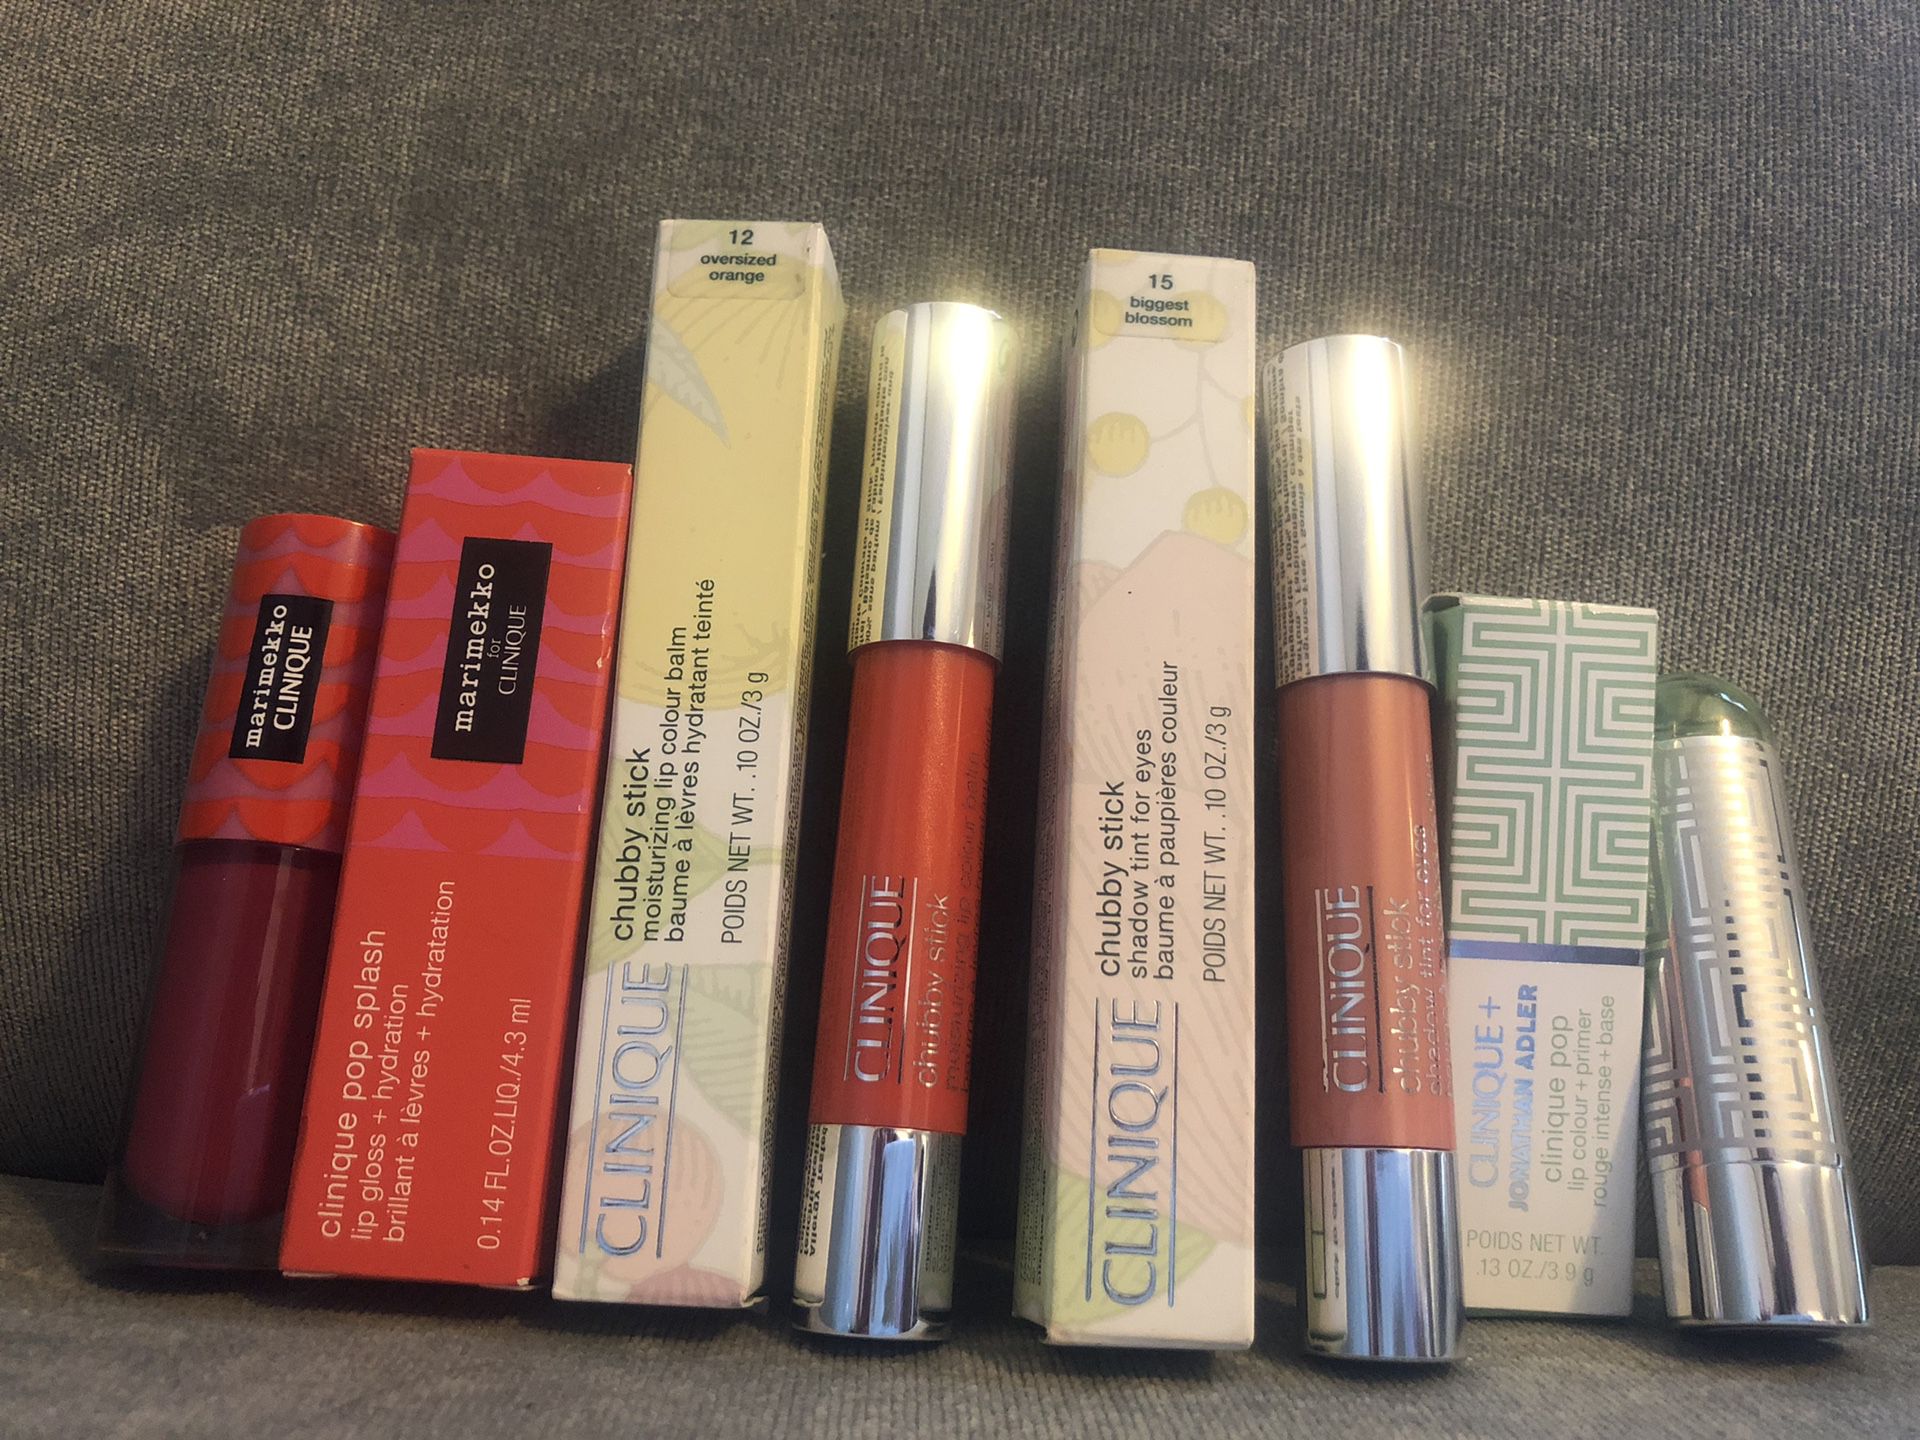 Clinique Limited addition lip products